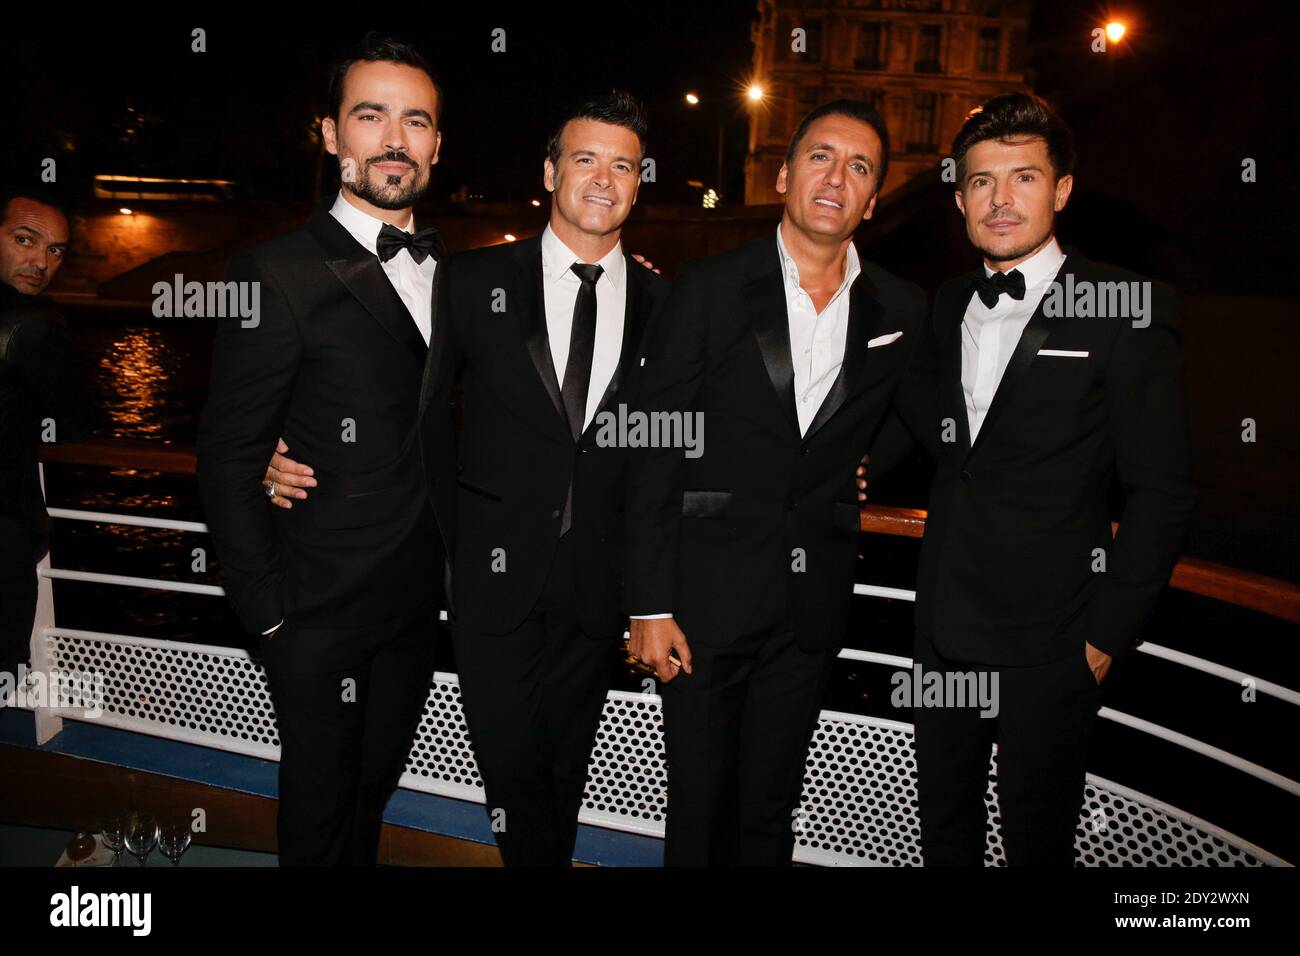 Damien Sargue, Roch Voisine, Dany Brillant and Vincent Niclo attending Forever Gentlemen 2 party to celebrate new album, in Paris, France on October 1, 2014. Photo by Jerome Domine/ABACAPRESS.COM Stock Photo